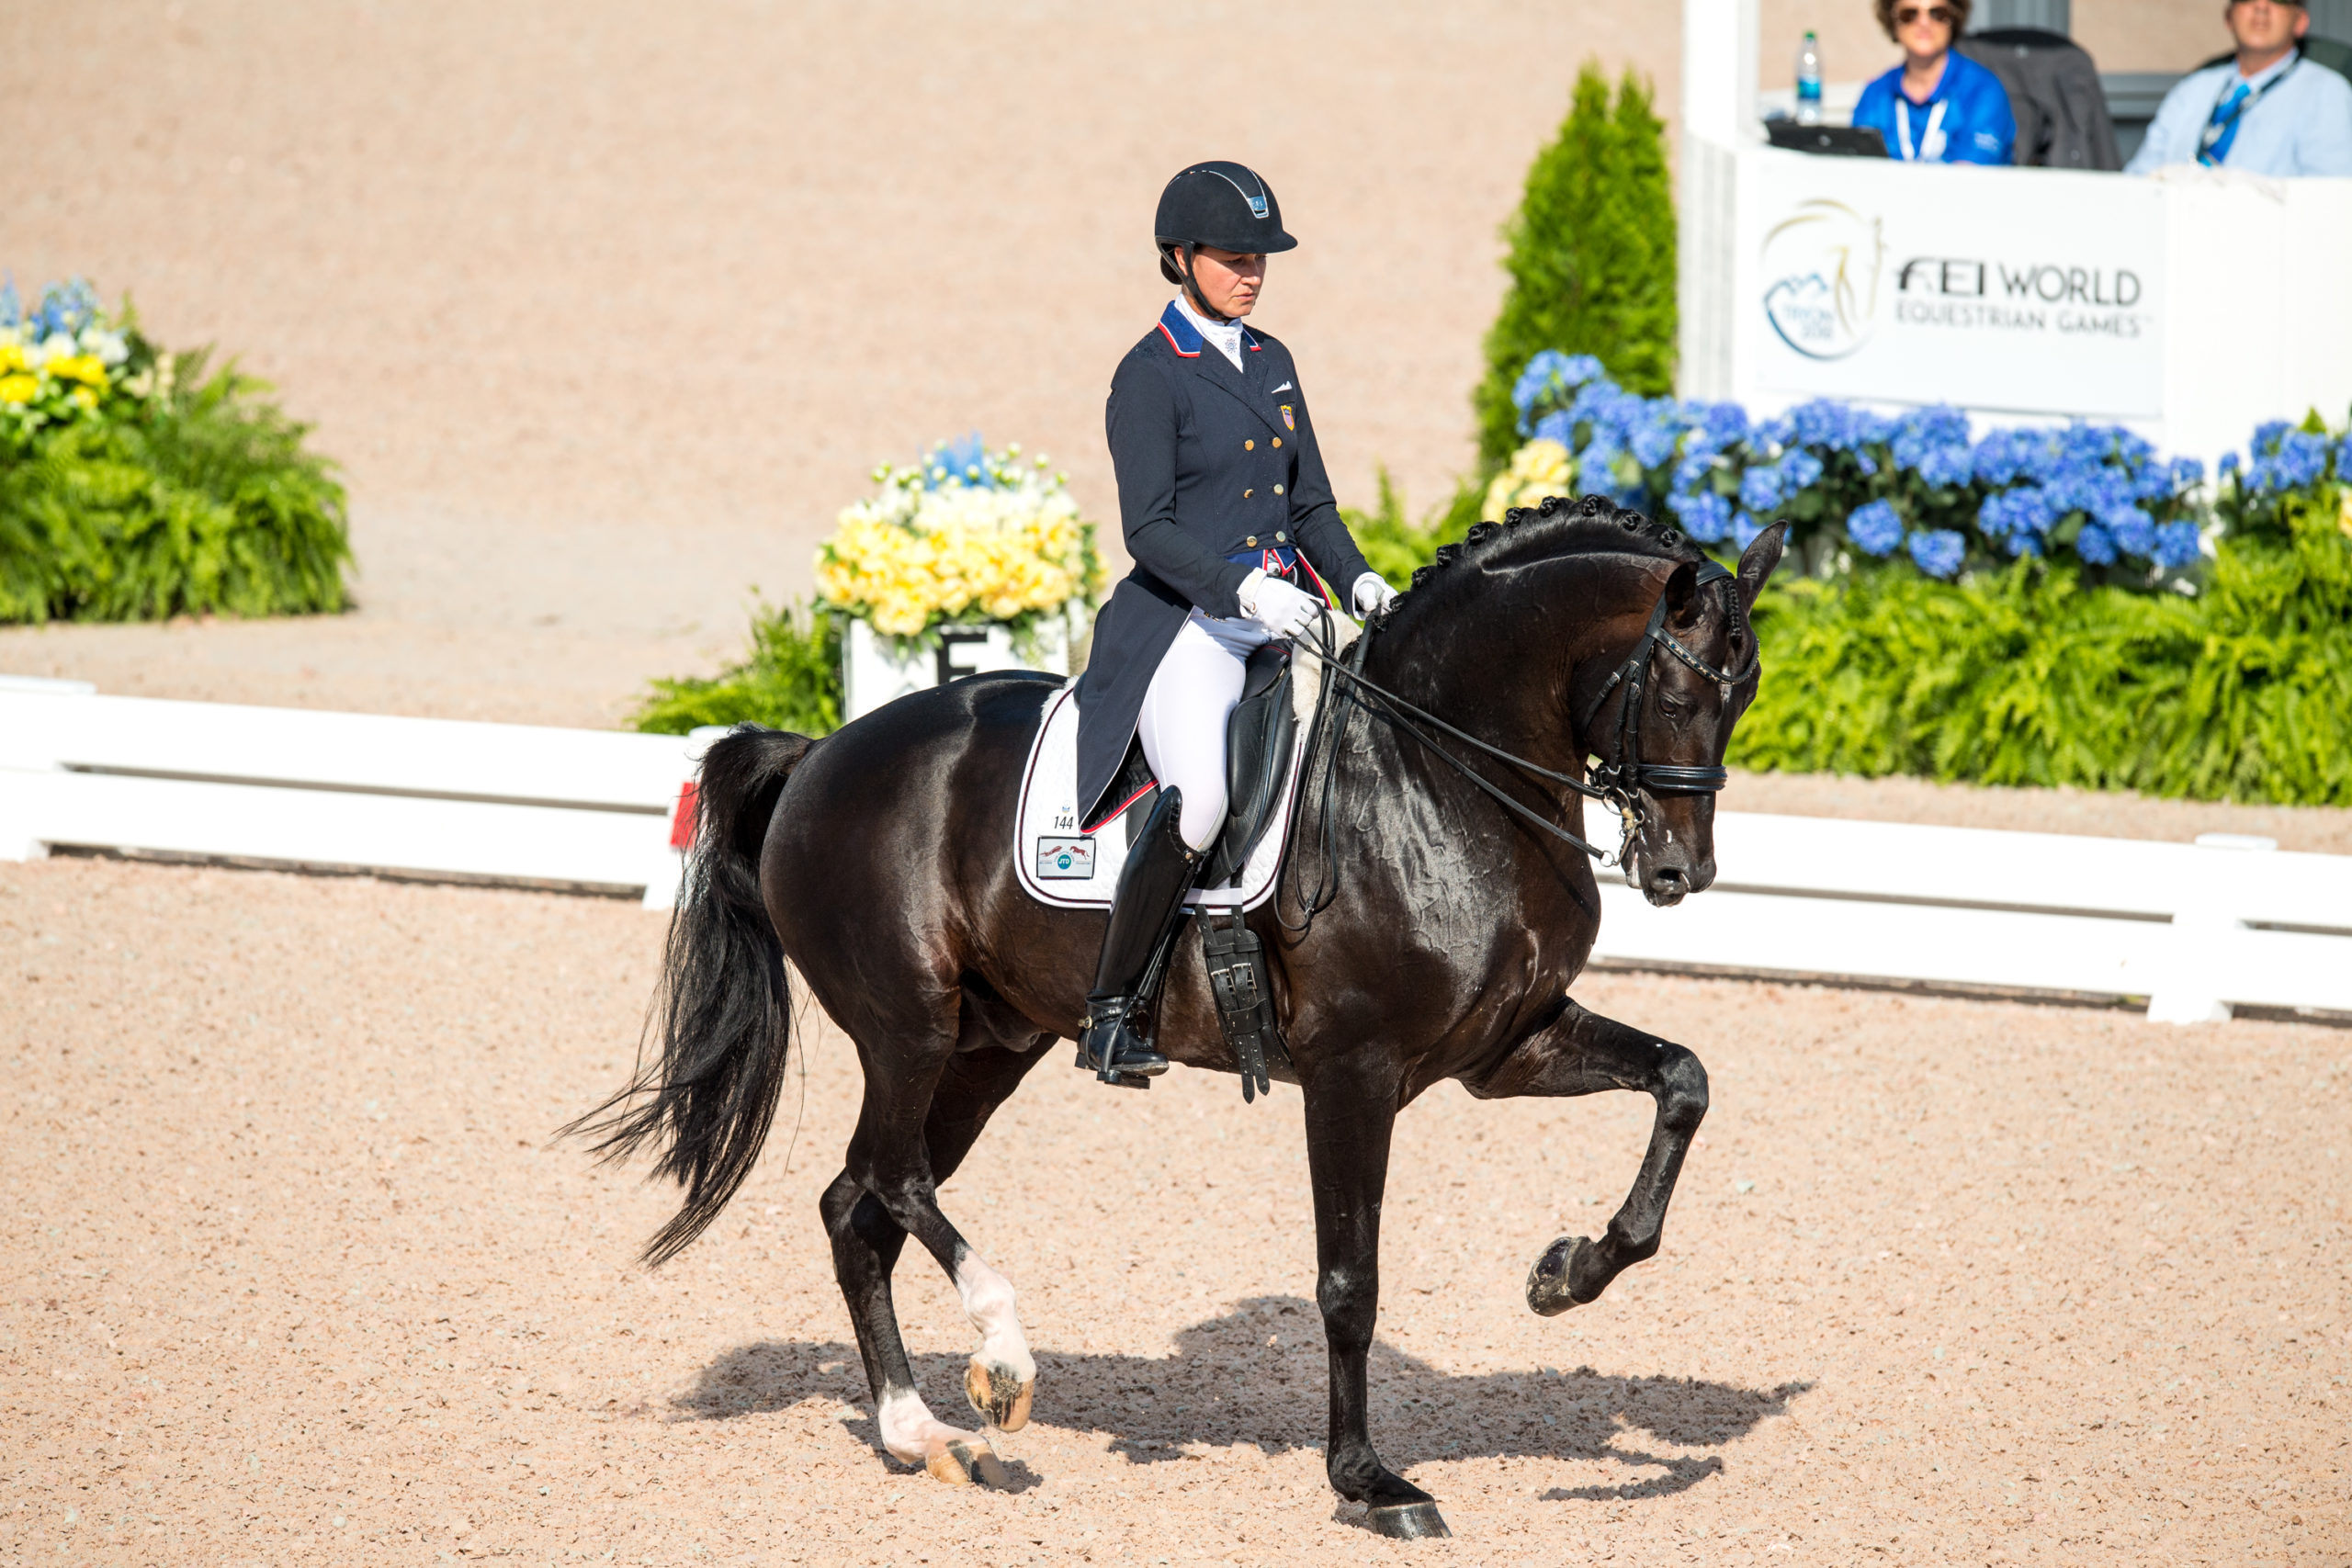 Dressage Terminology Explained: In Front of the Leg